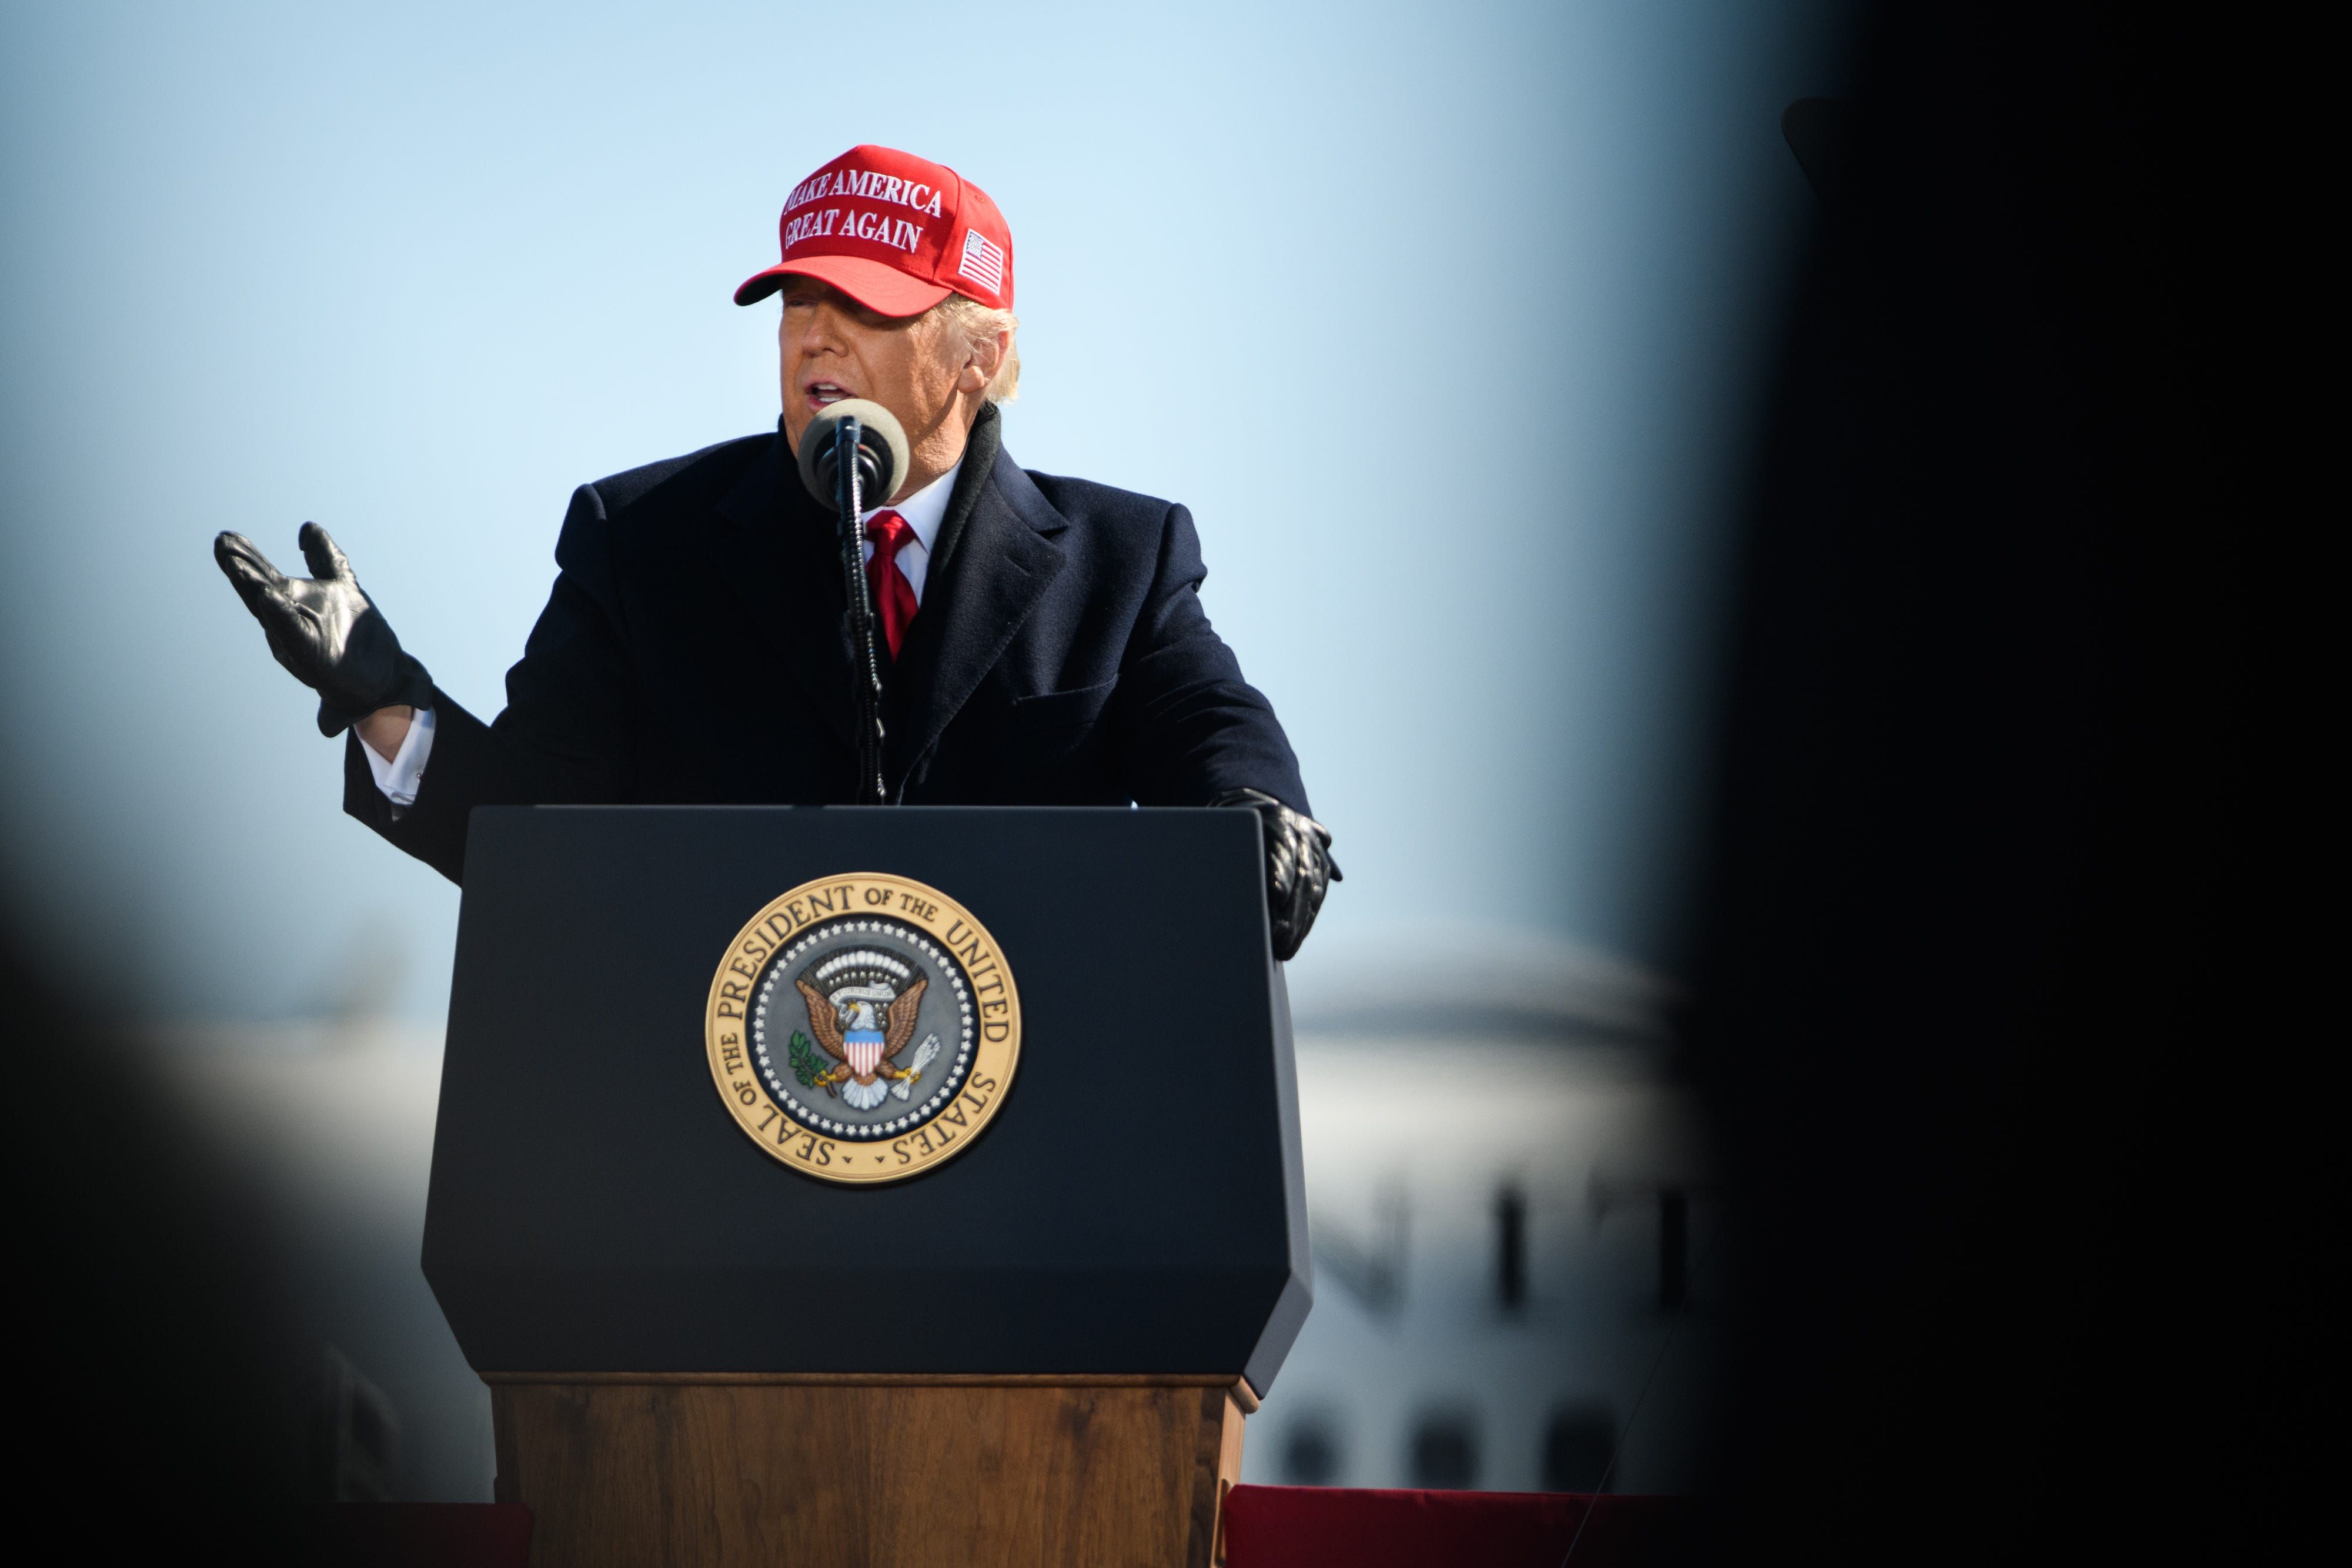 President Donald Trump gives a speech. Image by Stratos Brilakis / Shutterstock. United States, 2020.